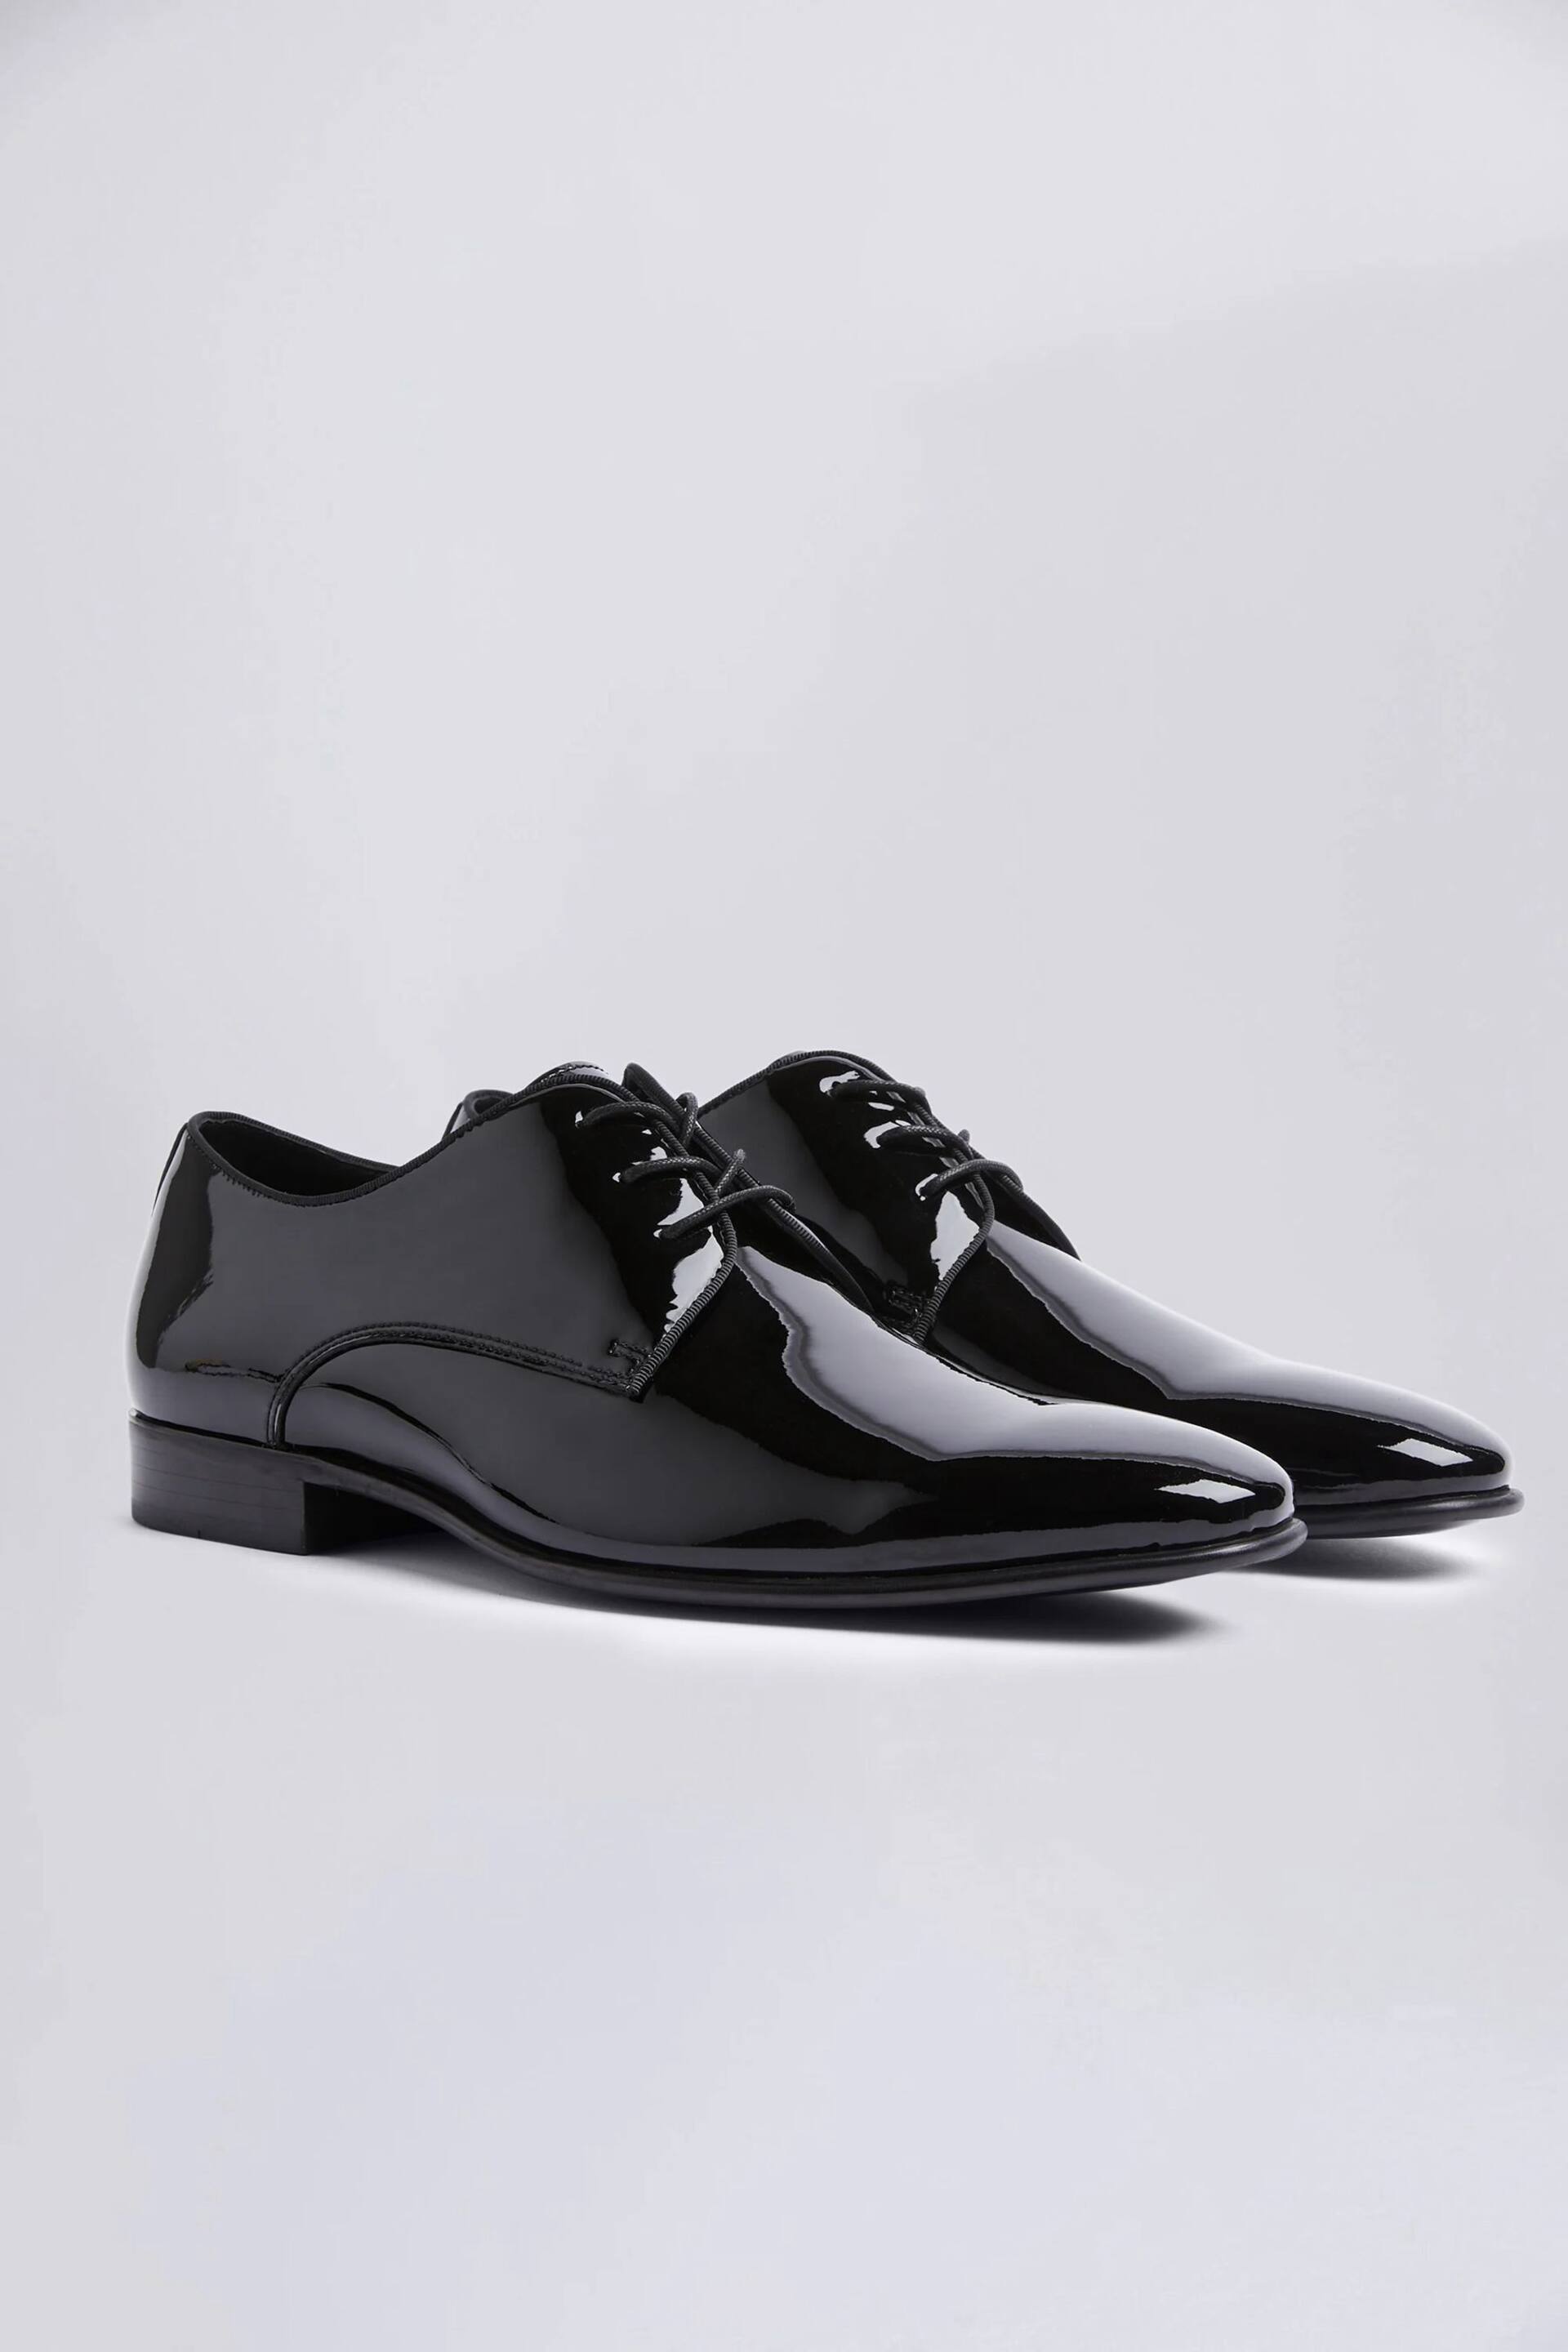 MOSS Ivy Black Patent Dress Shoes - Image 1 of 3